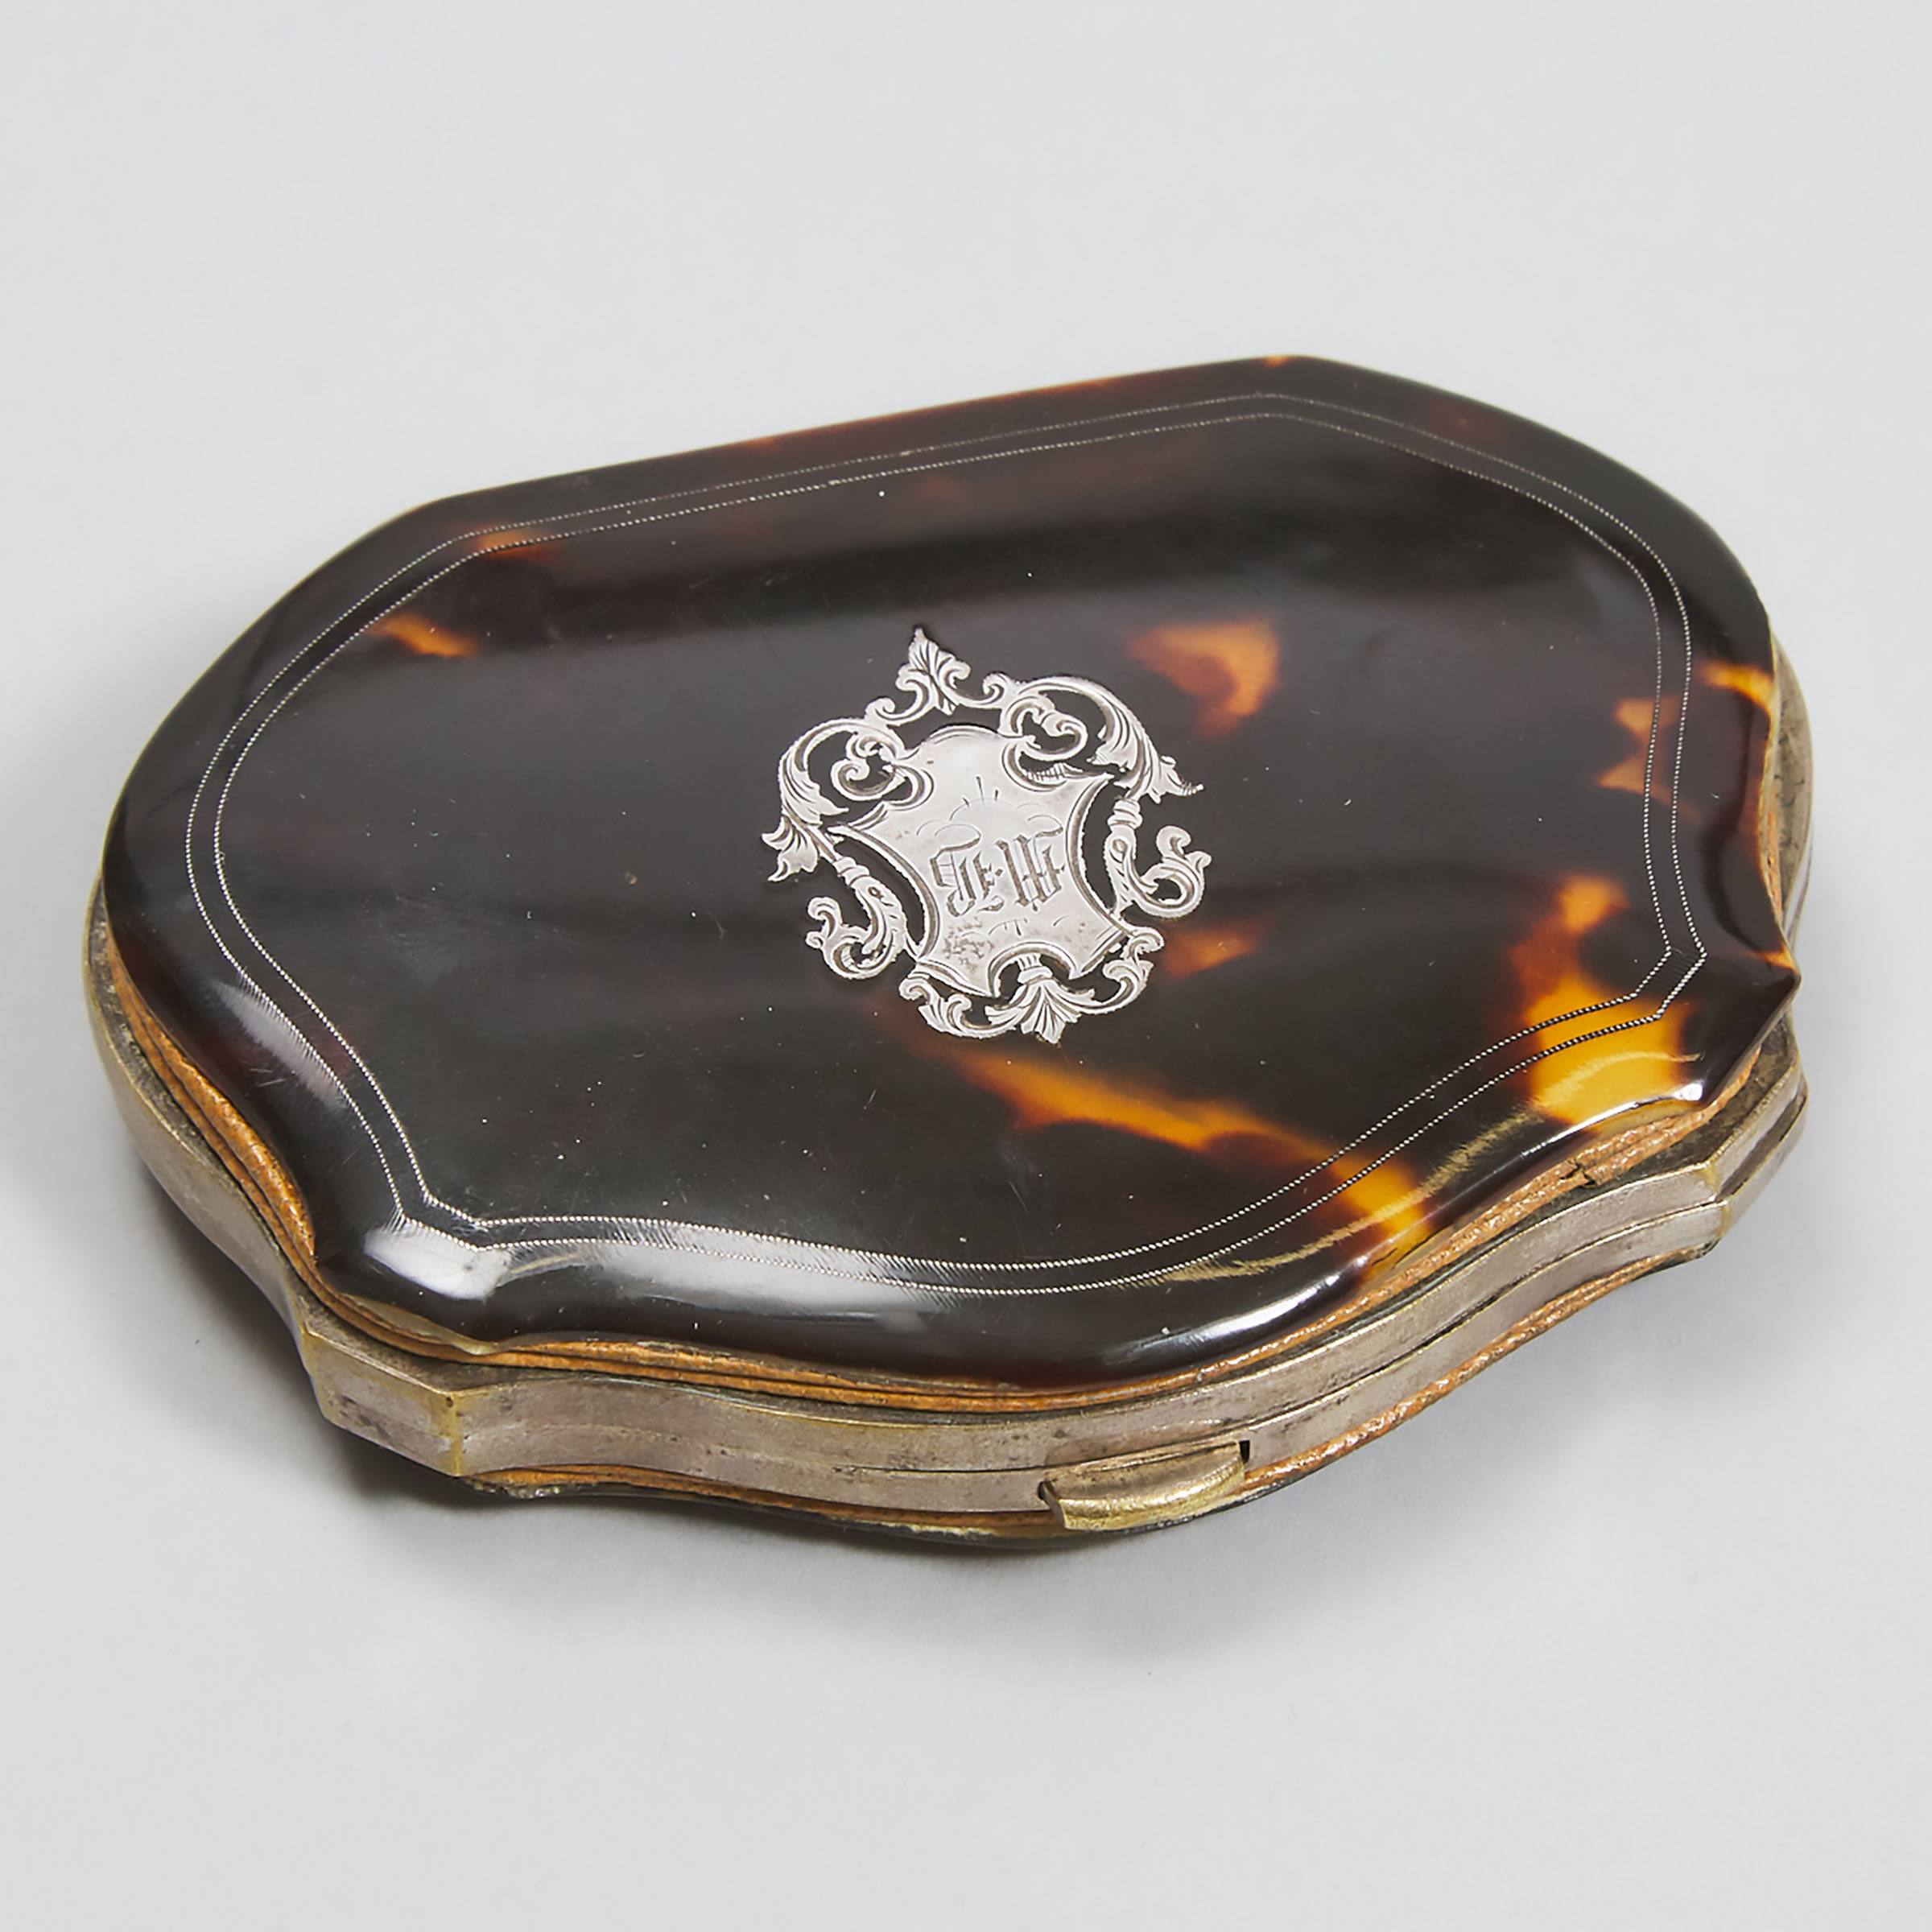 French Silver Inlaid Tortoiseshell Change Purse, 19th/early 20th century